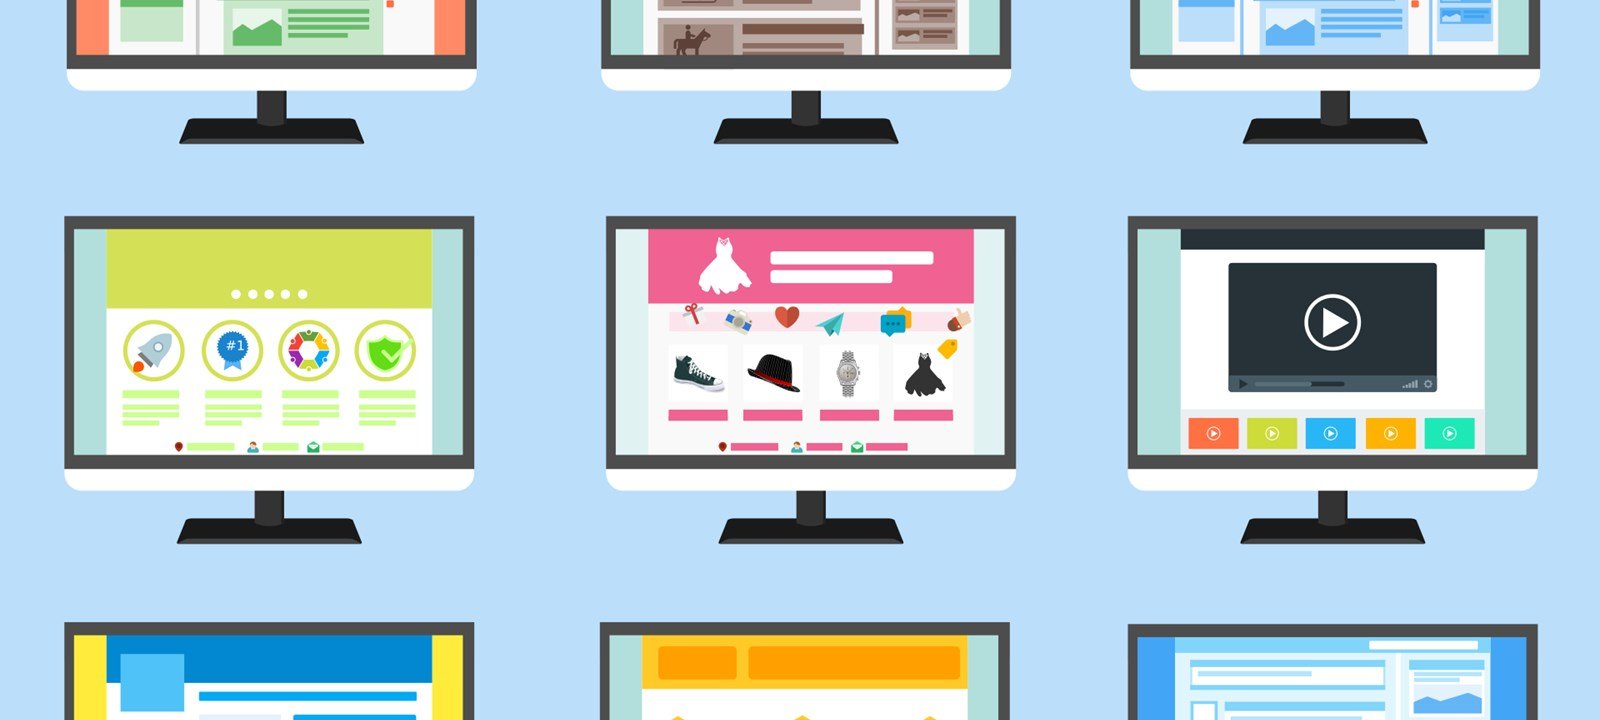 Ensure your new website is optimized for your users' needs with storyboarding